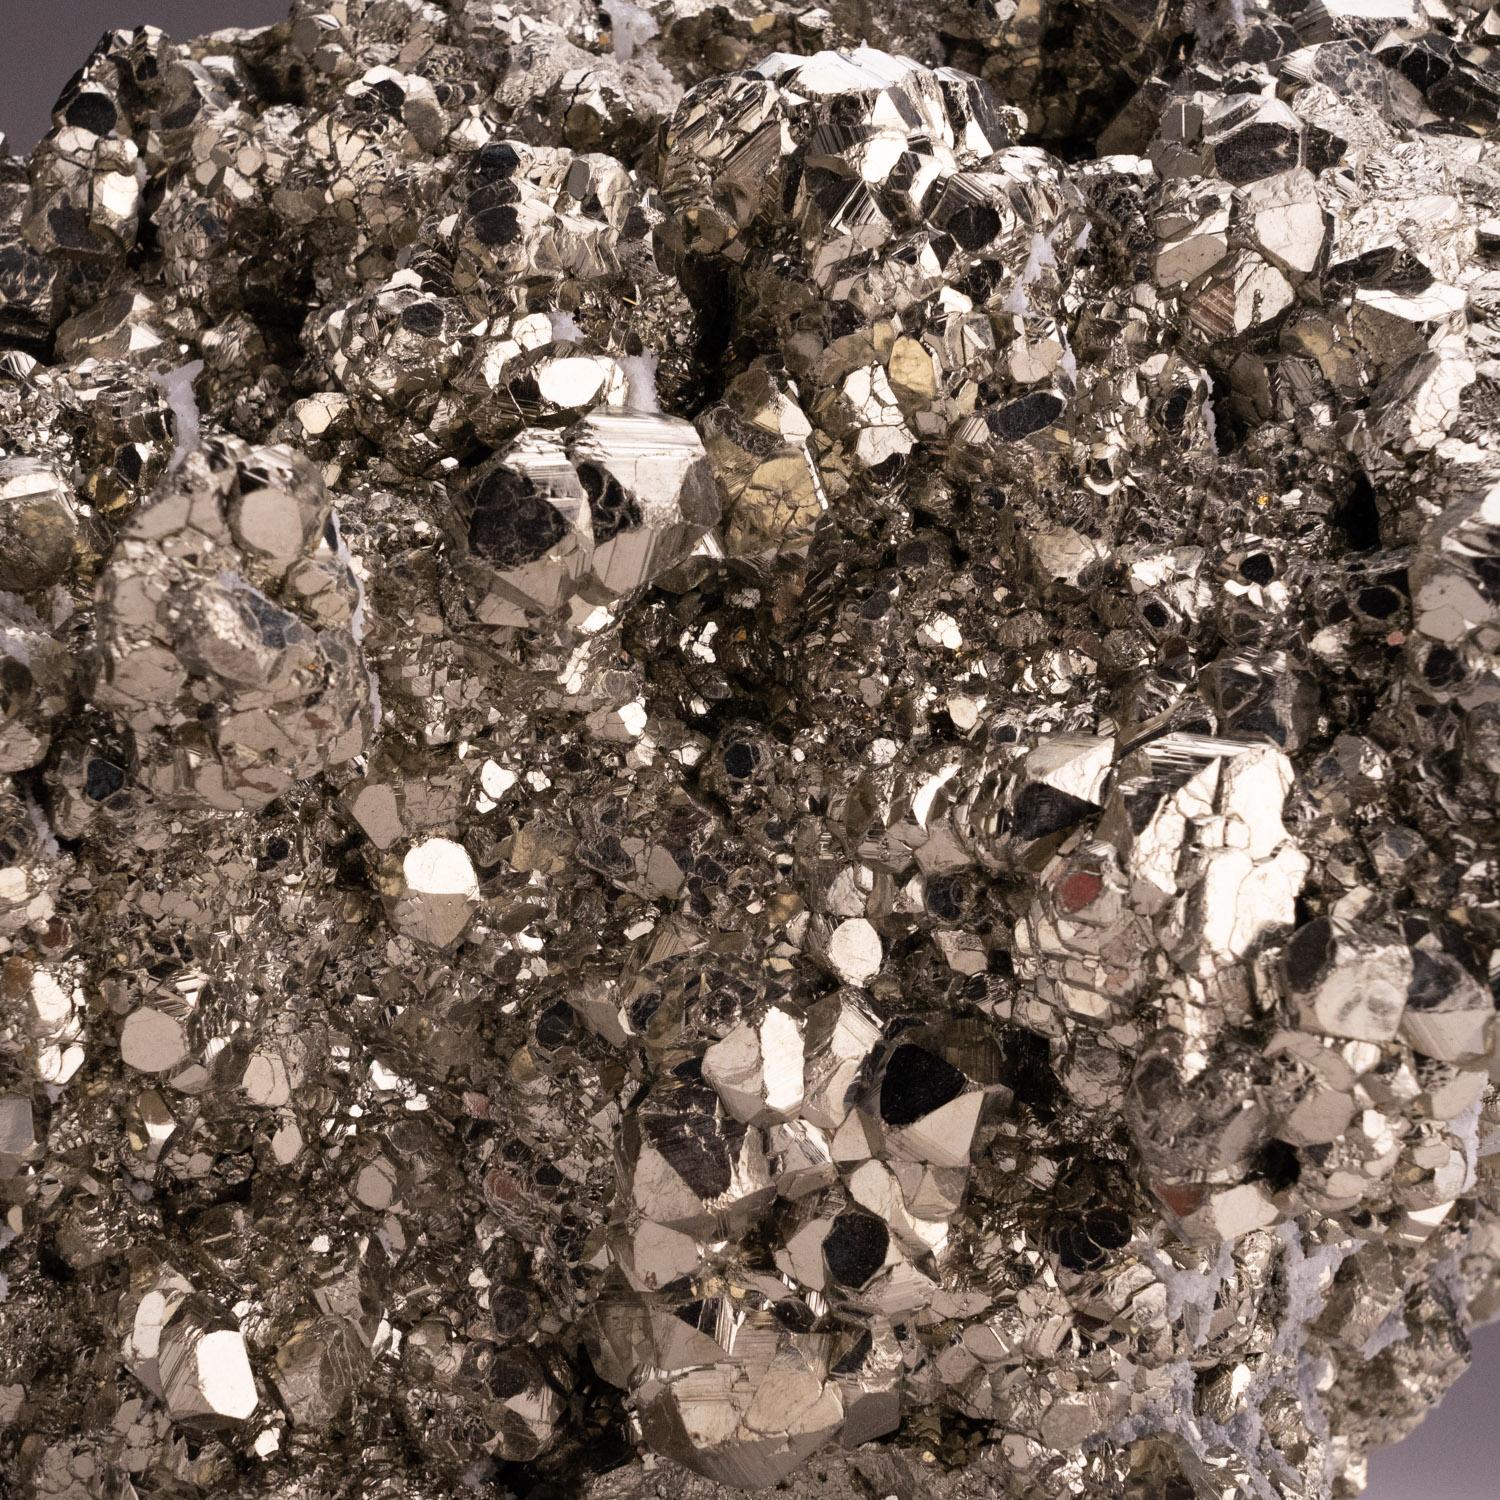 A classic and very attractive specimen of Pyrite from Huanzala Mine, Huanuco Province, Peru. Complex pyritohedron cluster with striated crystal faces and a metallic mirror luster with a bright golden color. There are several areas coated with